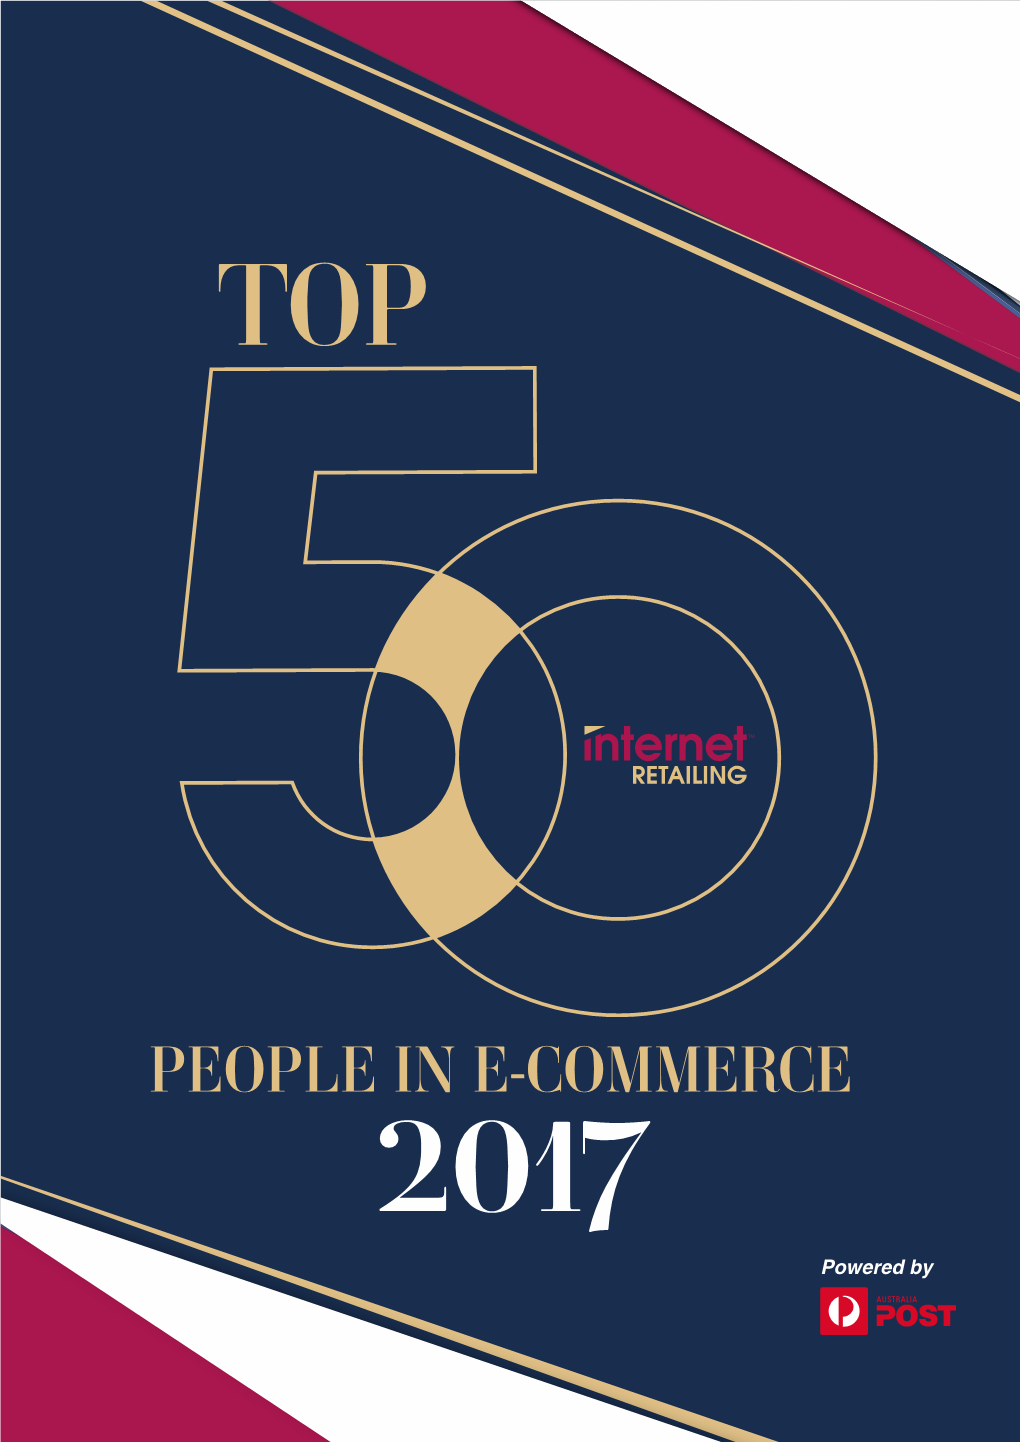 Top 50 People in E-Commerce 2017